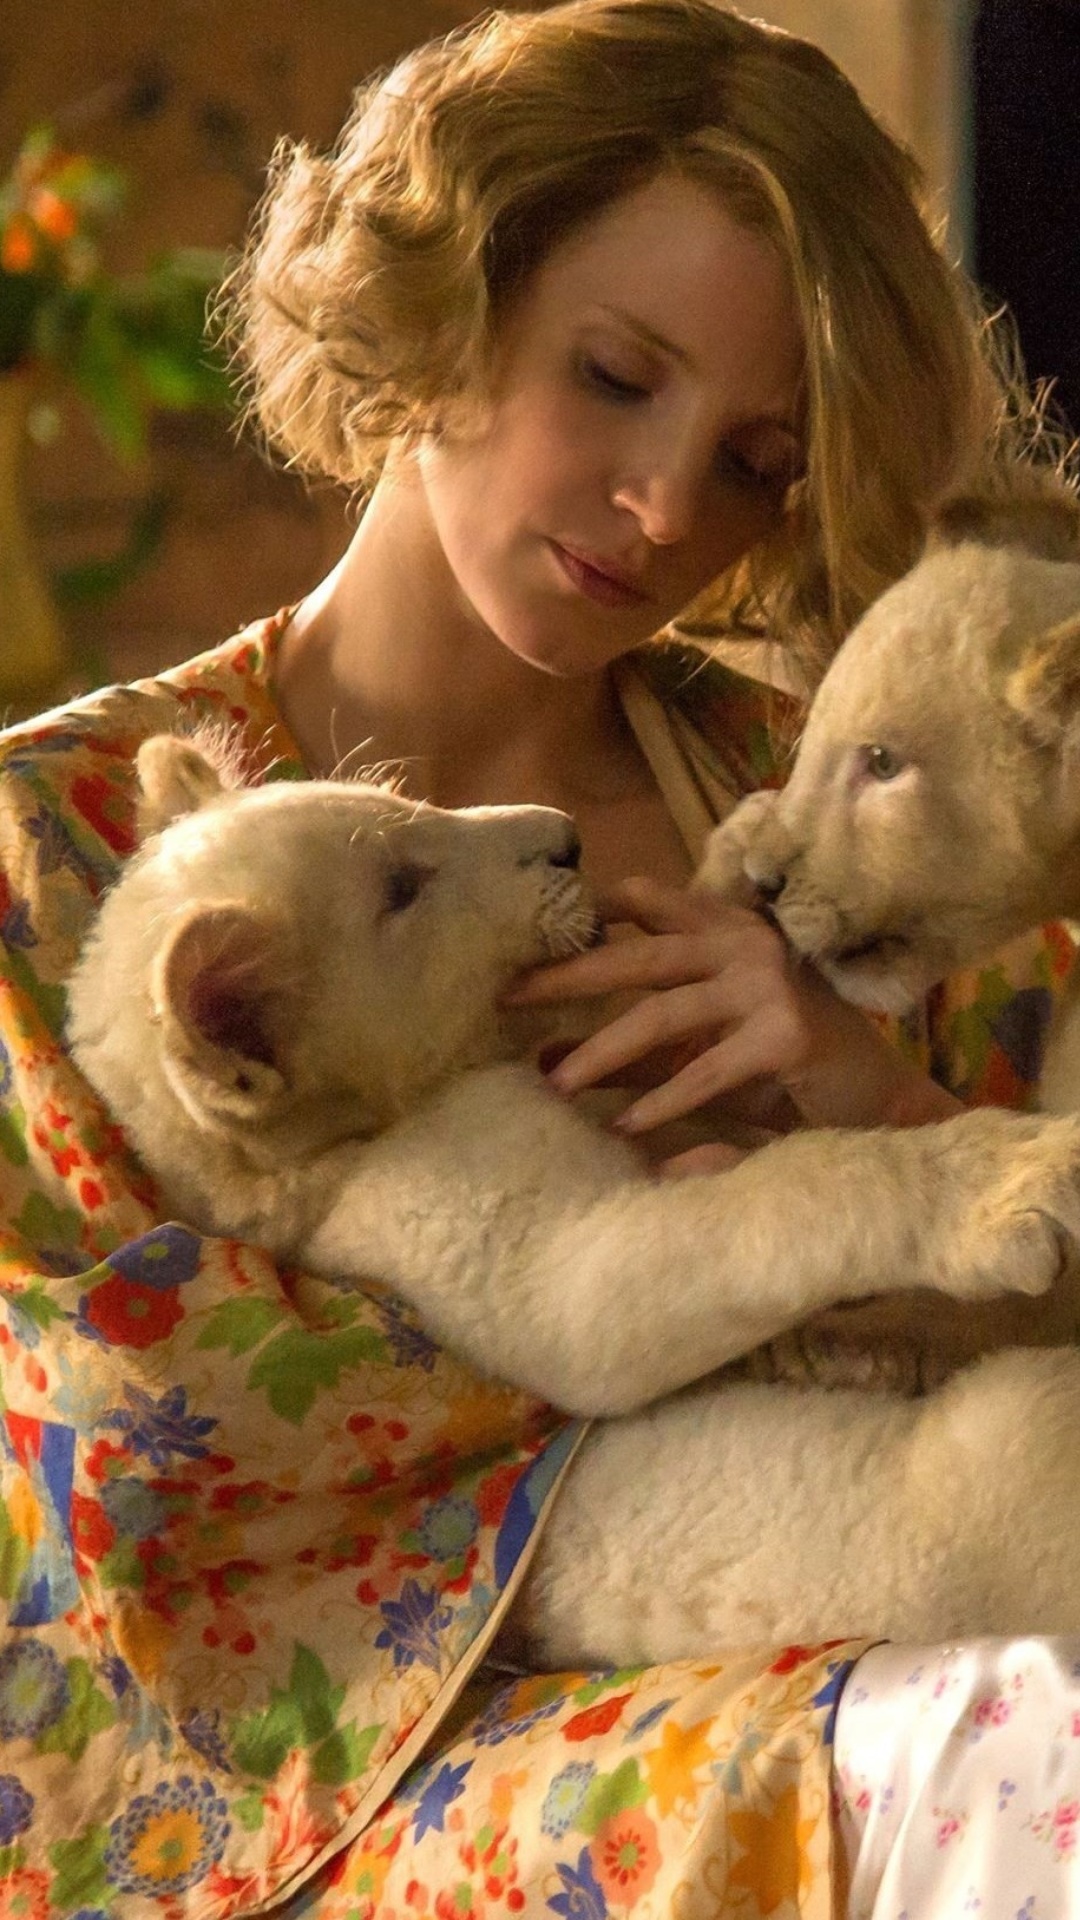 The Zookeepers Wife Film with Jessica Chastain screenshot #1 1080x1920